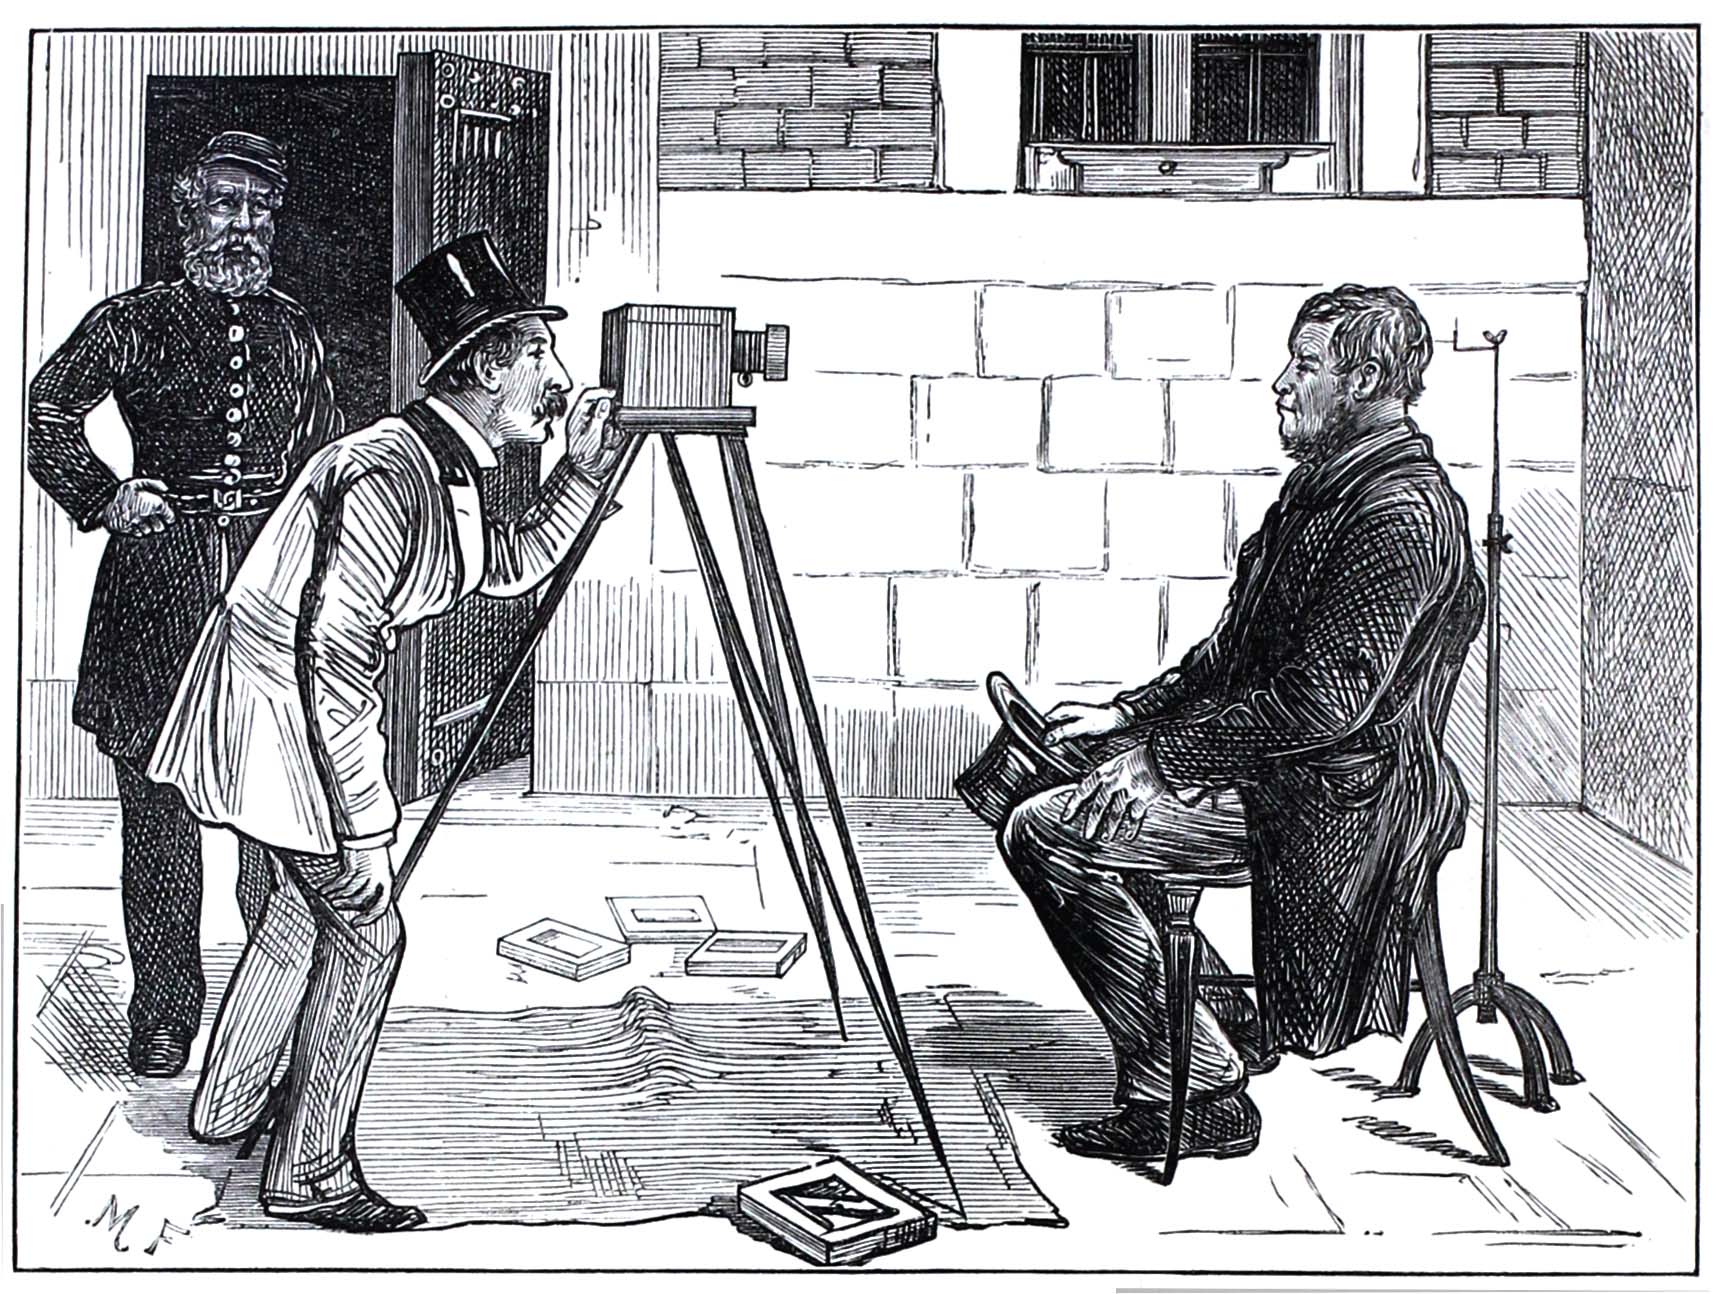 A prisoner at Newgate Prison having his photo taken for the prison records, from 'sketches of Newgate' published in theIllustrated London News in 1873